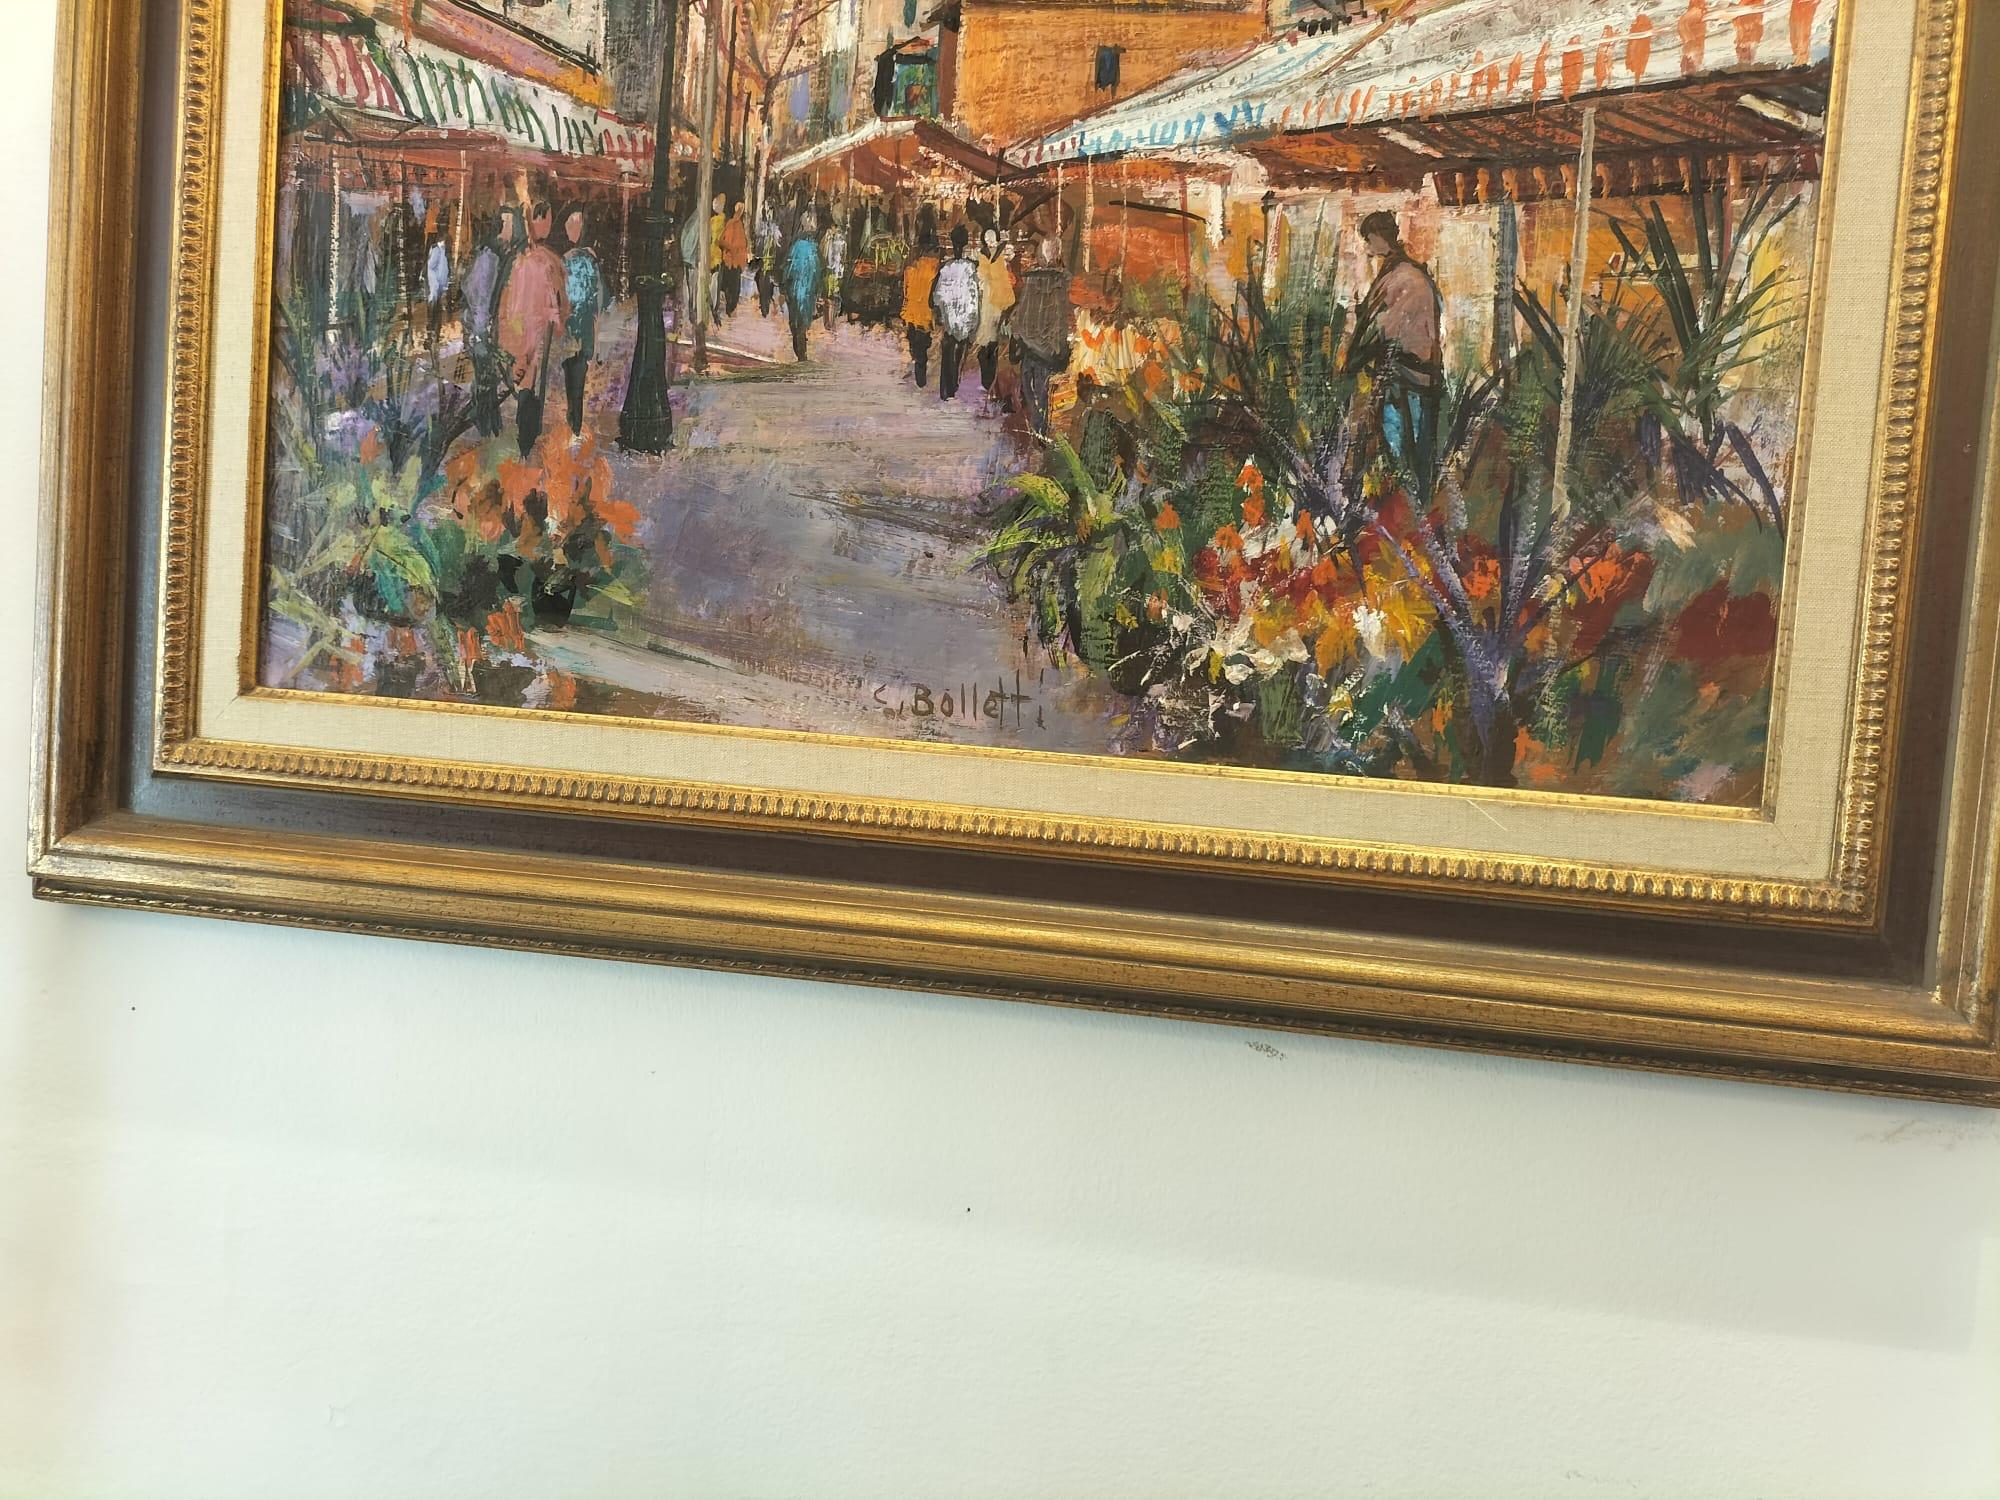 Modern Oil-on-Canvas Painting of a Flower Market by Cesar Boletti (1915-1995) For Sale 1